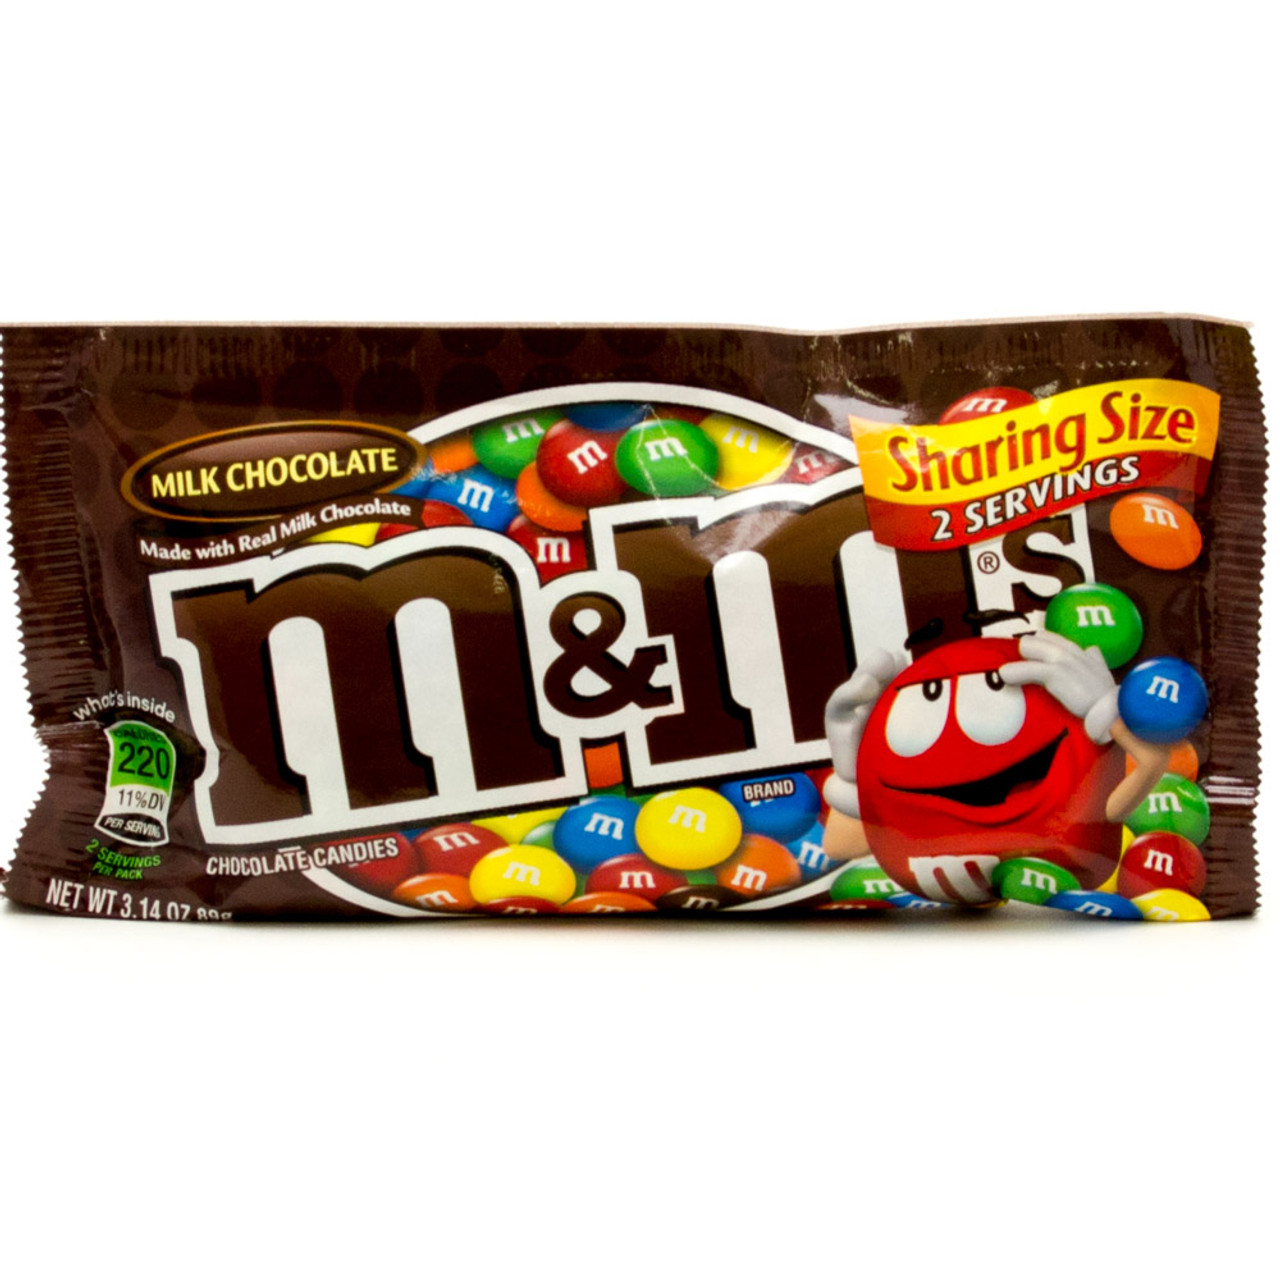 M&M Mars Variety Pack 24 Count Candy Bars